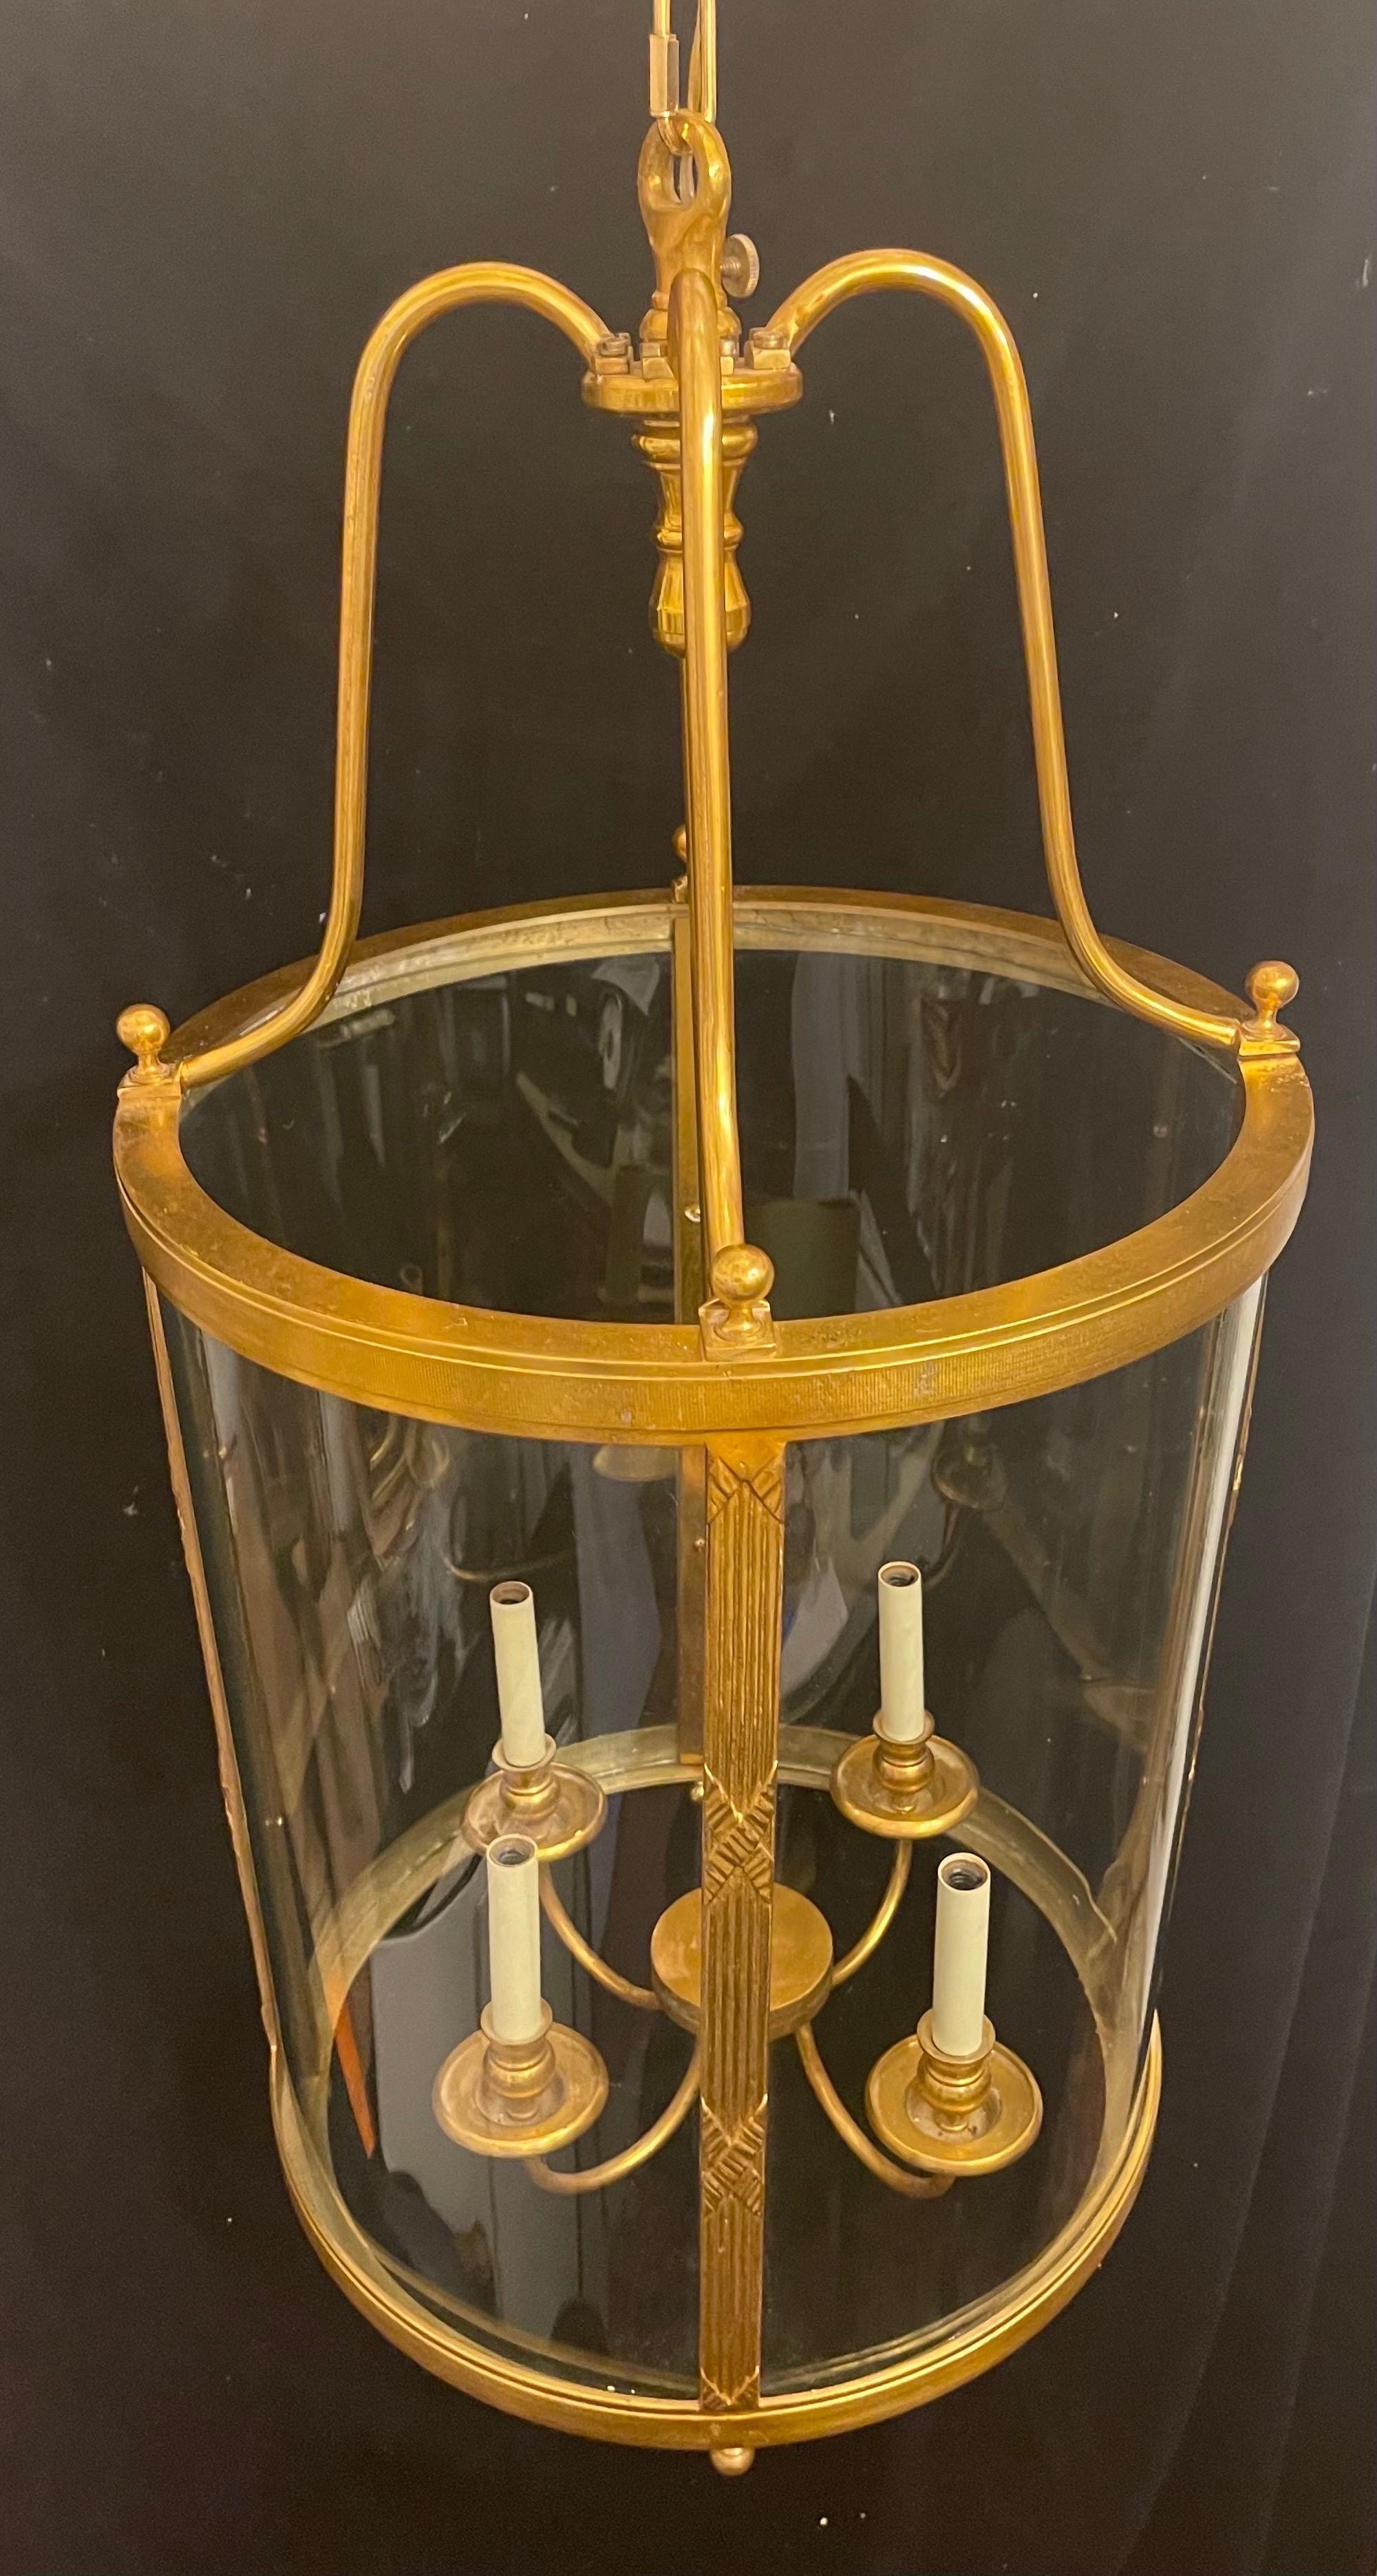 Gilt Wonderful Large French Bronze Regency Empire Curved Glass Panel Lantern Fixture For Sale